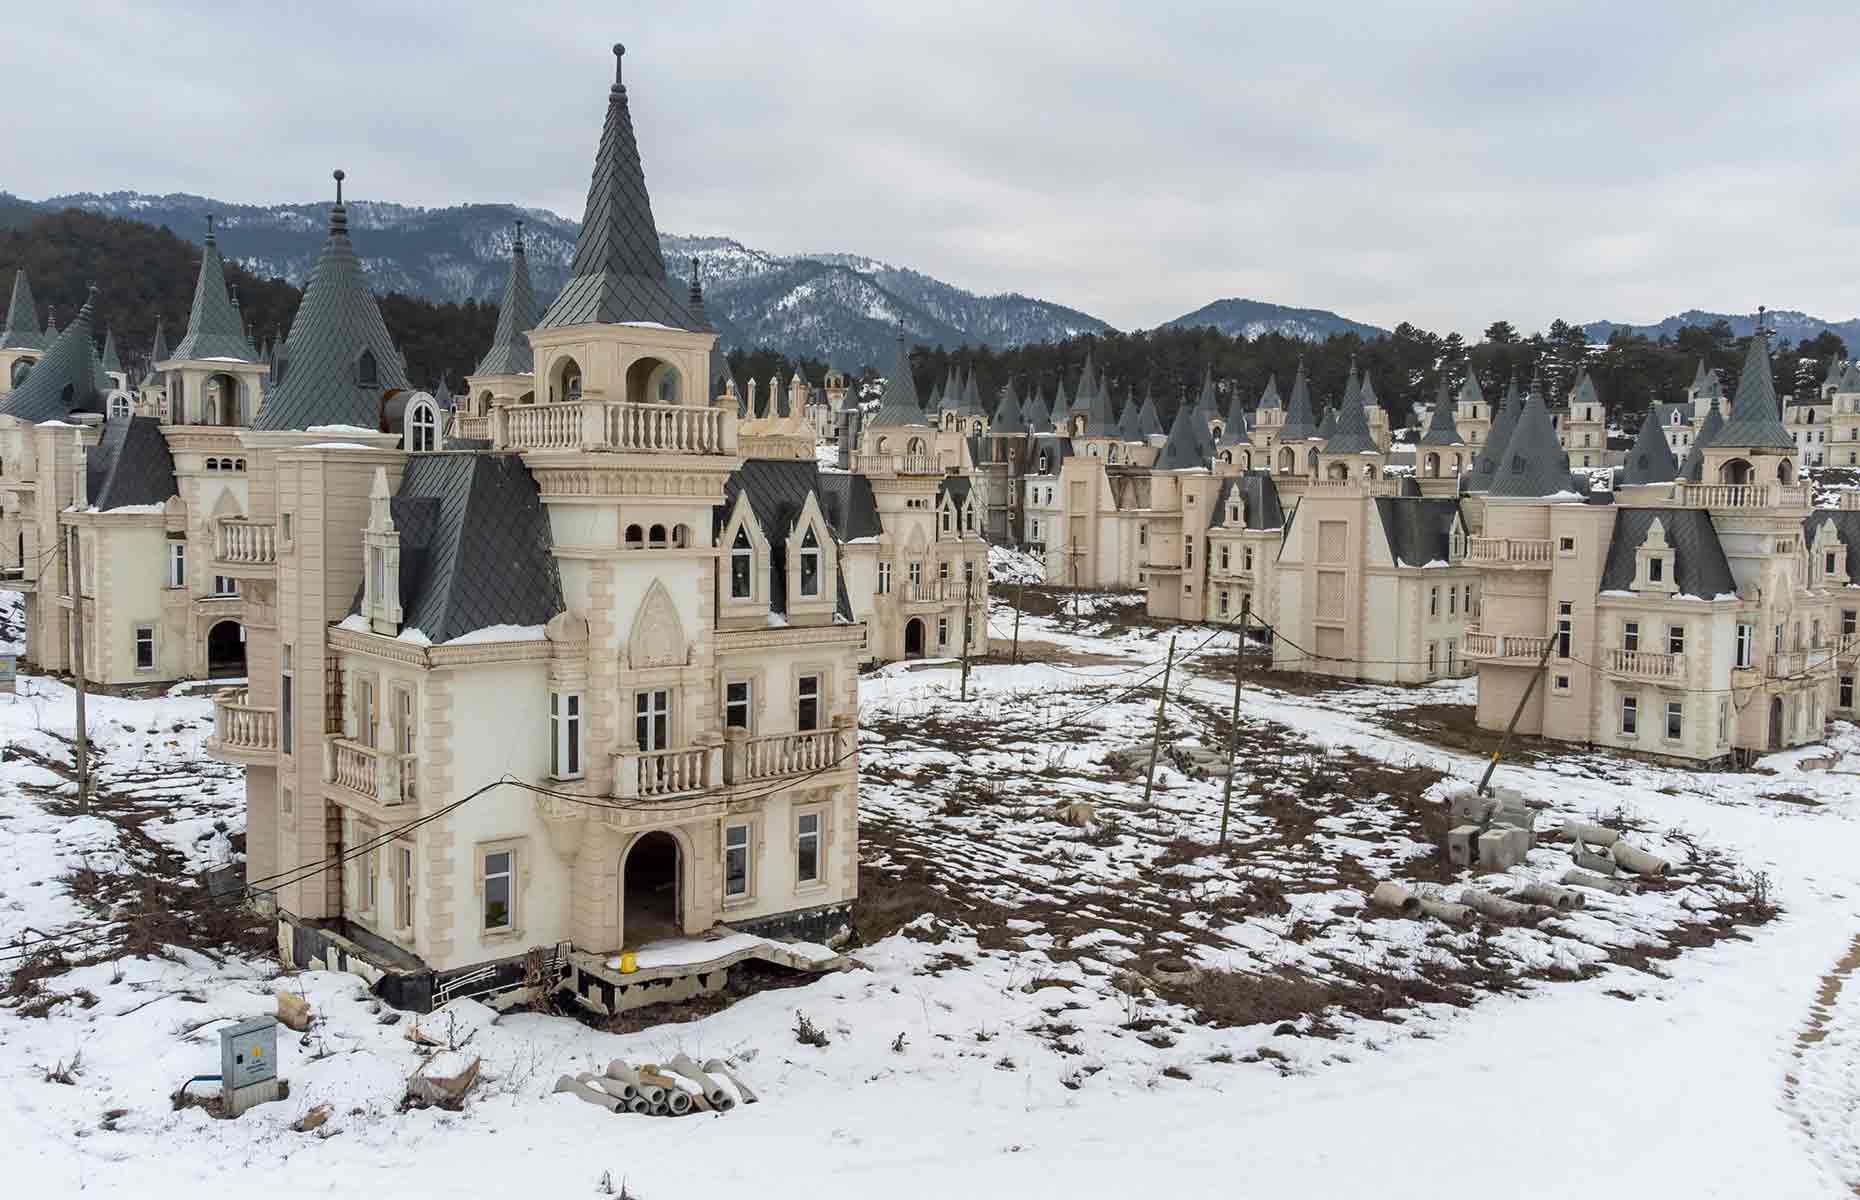 <p>This image shows the villas shrouded in snow in February 2022. While their architecture is still grand and stately, many are open to the elements, the winter frost no doubt wreaking havoc on the structures. A power line appears to run through the site, but it looks less than stable, and discarded construction materials litter the frozen ground.</p>  <p>If, or when, this deserted development will be completed is anyone's guess. The Sarot Group's CEO Mezher Yerdelen vowed to have the project done and dusted in 2021, a pledge made before the coronavirus pandemic hit. Two years on, that ambitious deadline was clearly never met.</p>